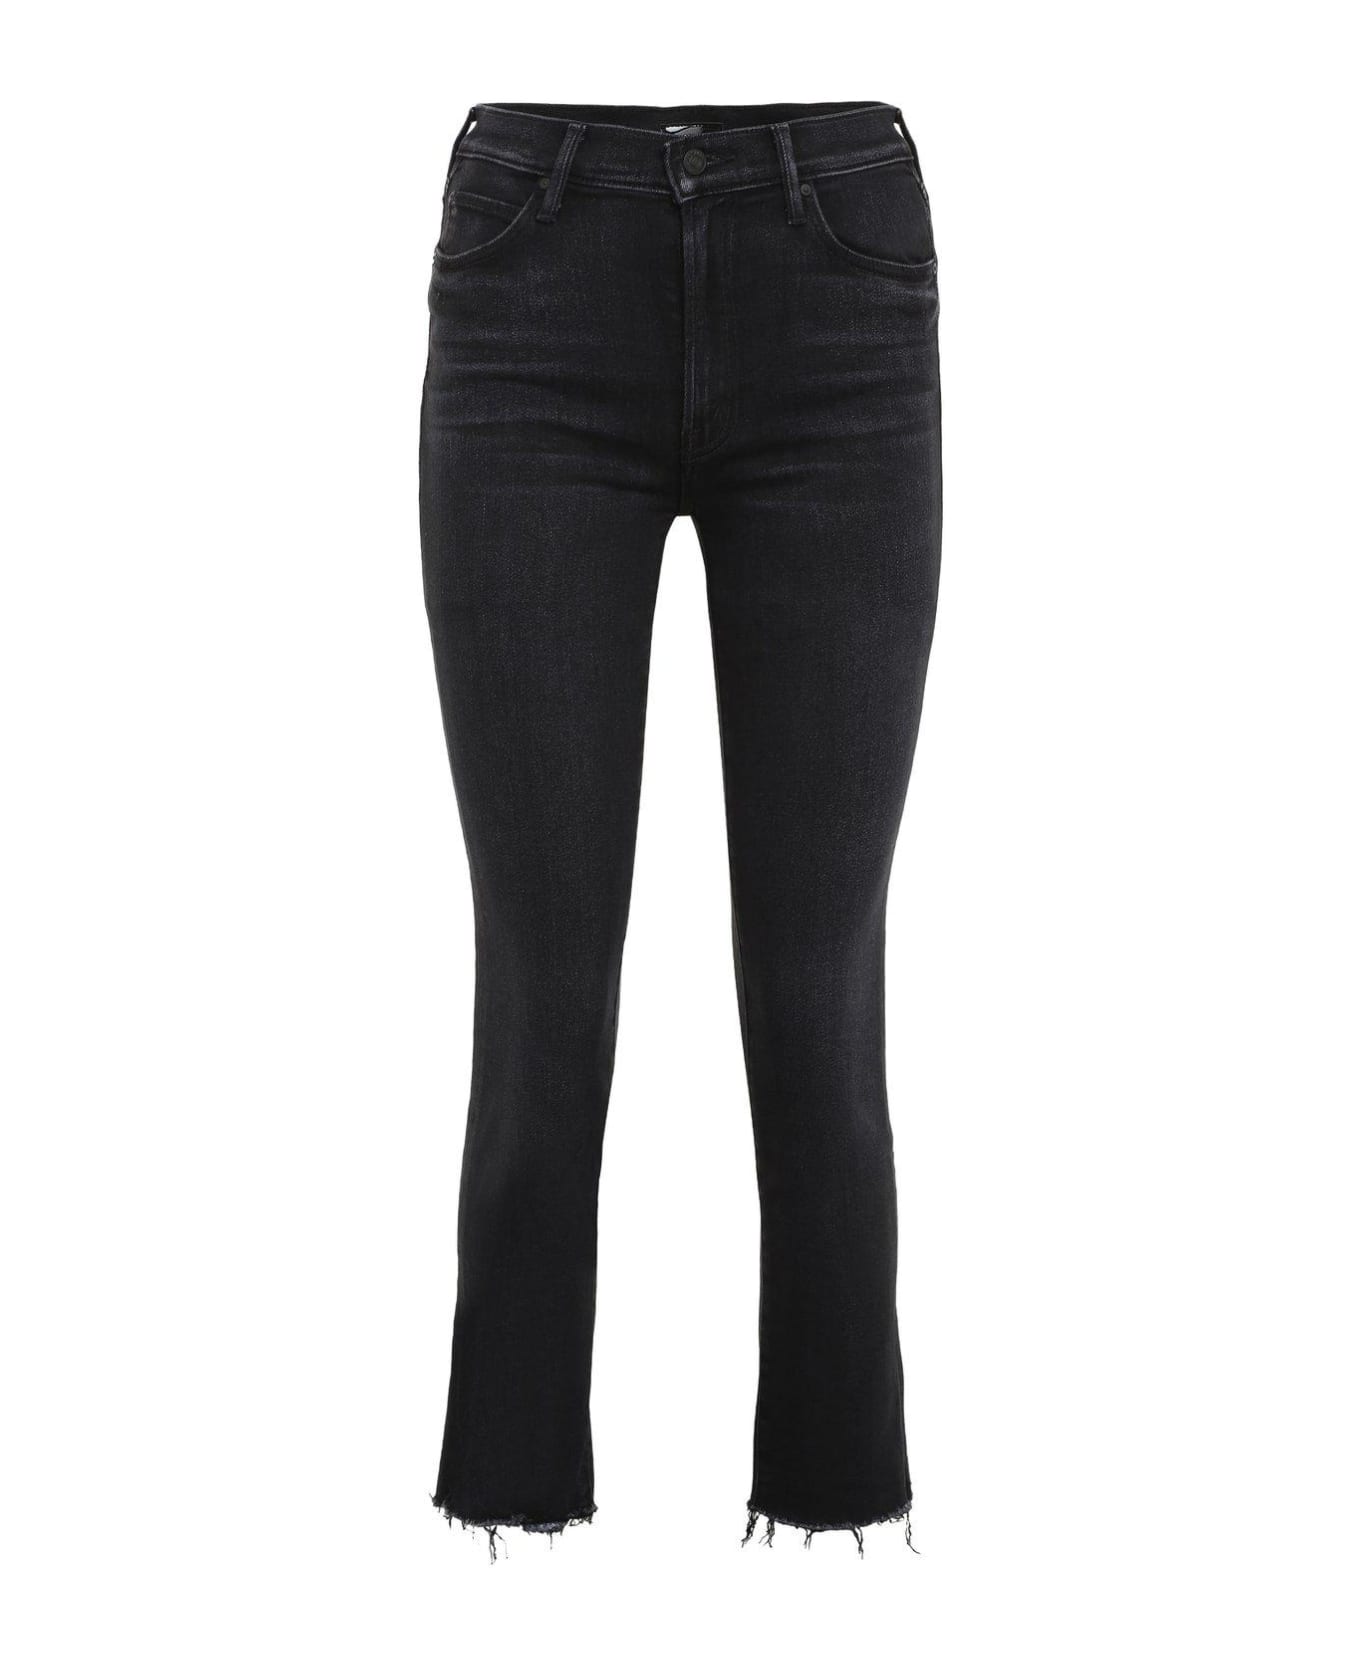 Mother The Stunner High Waist Jeans - Nero